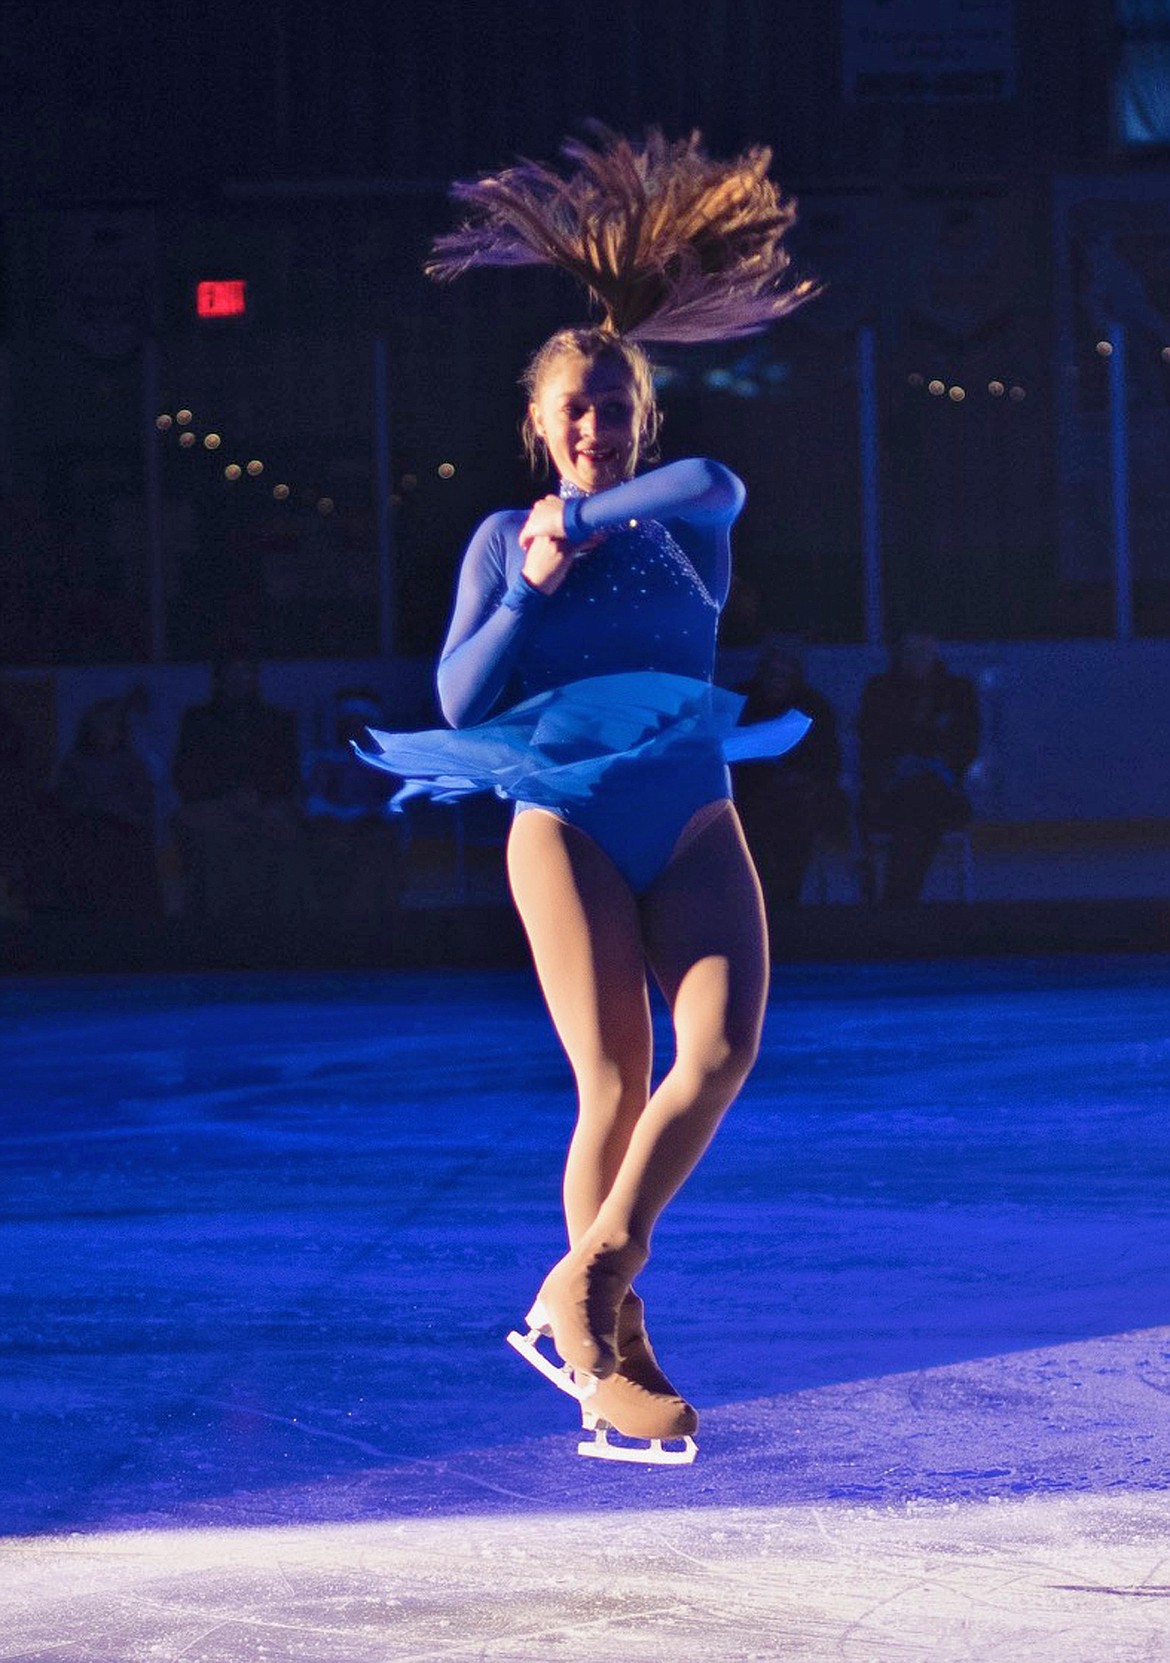 Glacier Skate Academy's Muriel Mercer, 15, attained Double Gold Status, the highest level of figure skating, after recently passing senior US Figure Skating tests. She is the first out of the Flathead Valley to achieve this rank. (Photo provided by Kristin Cowan)